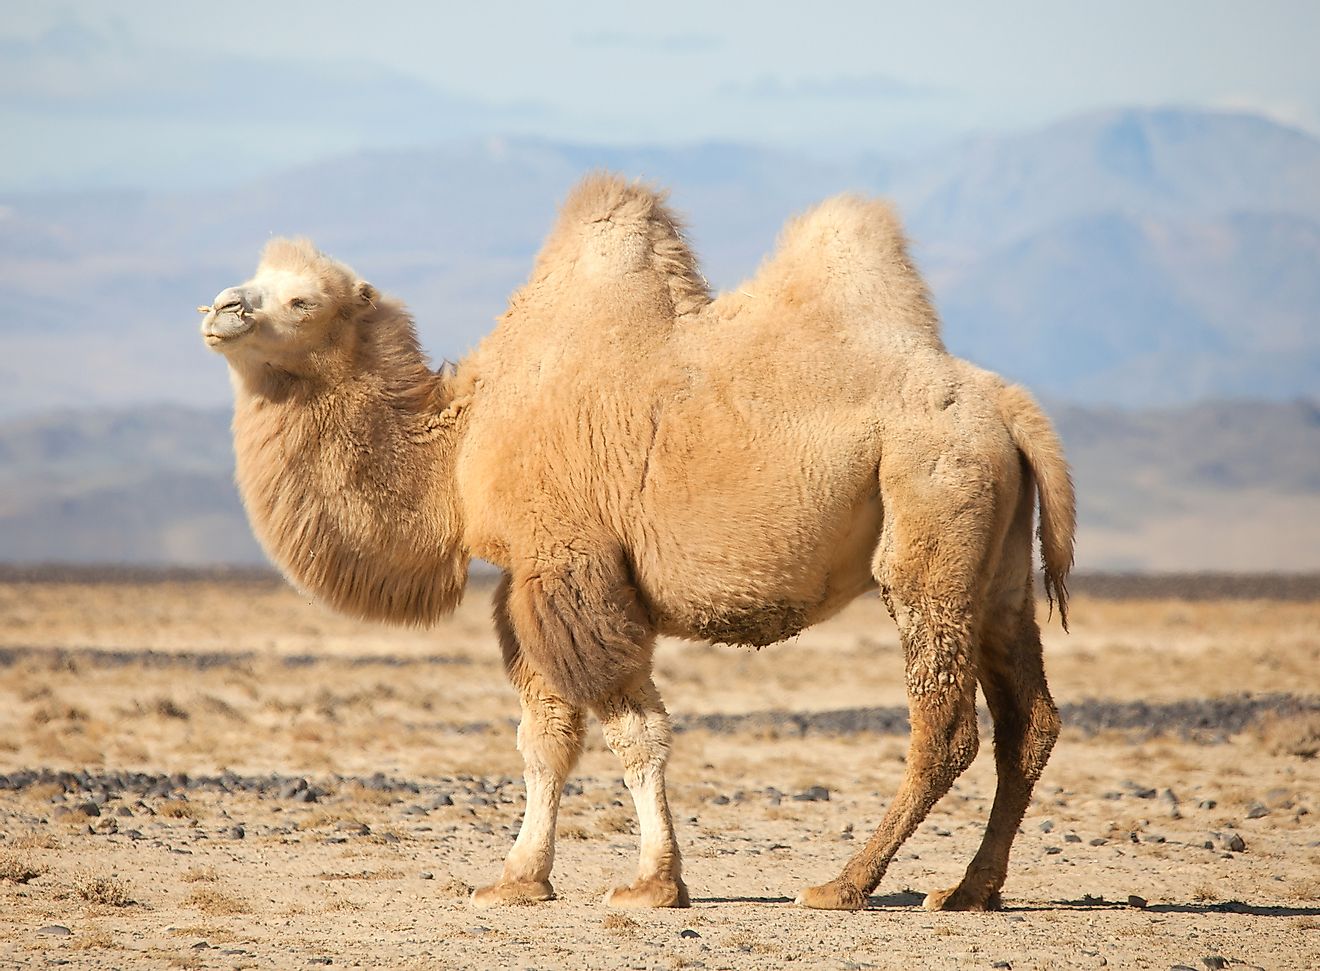 Bactrian camels are one of the endangered mammals that can be found in Mongolia. 